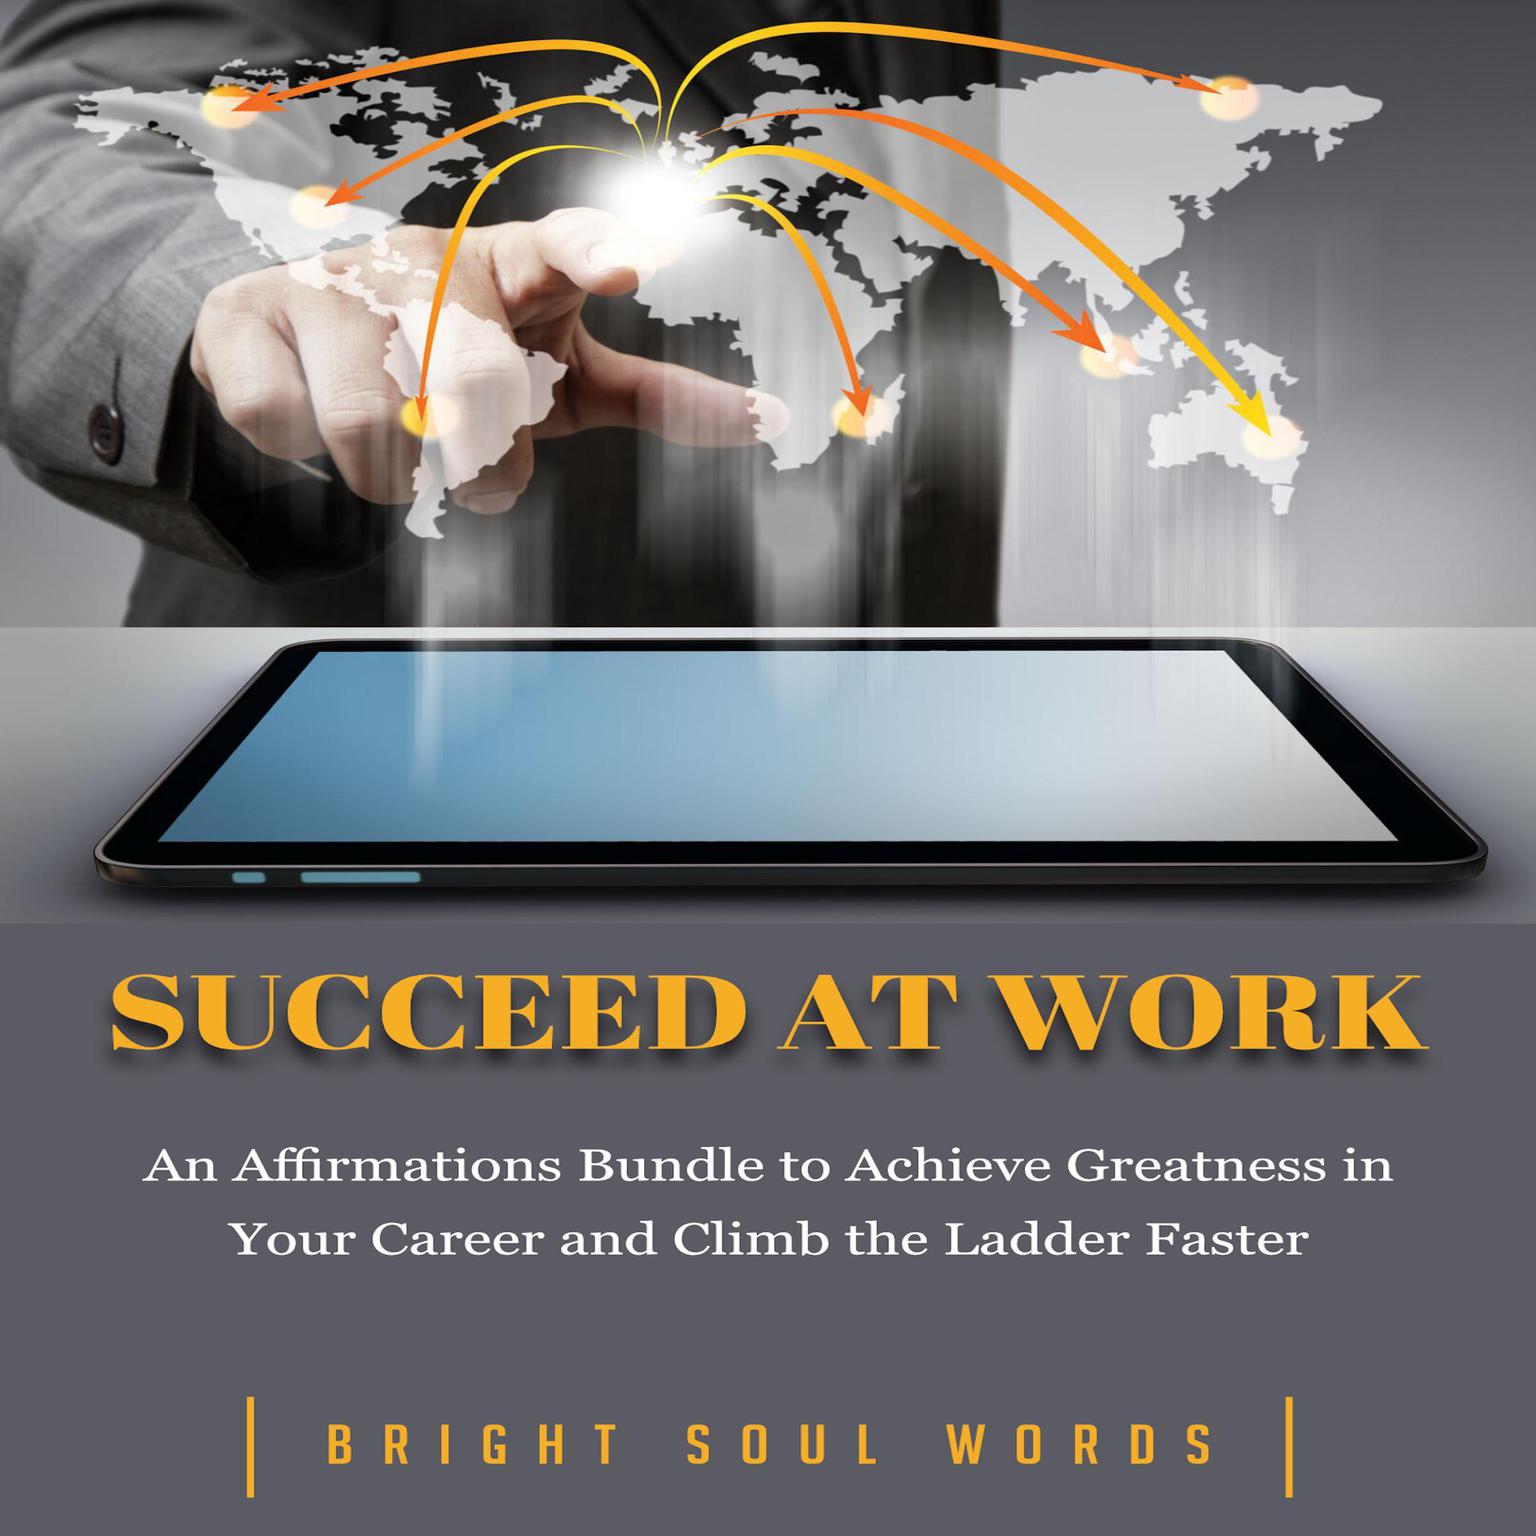 Succeed at Work: An Affirmations Bundle to Achieve Greatness in Your Career and Climb the Ladder Faster Audiobook, by Bright Soul Words